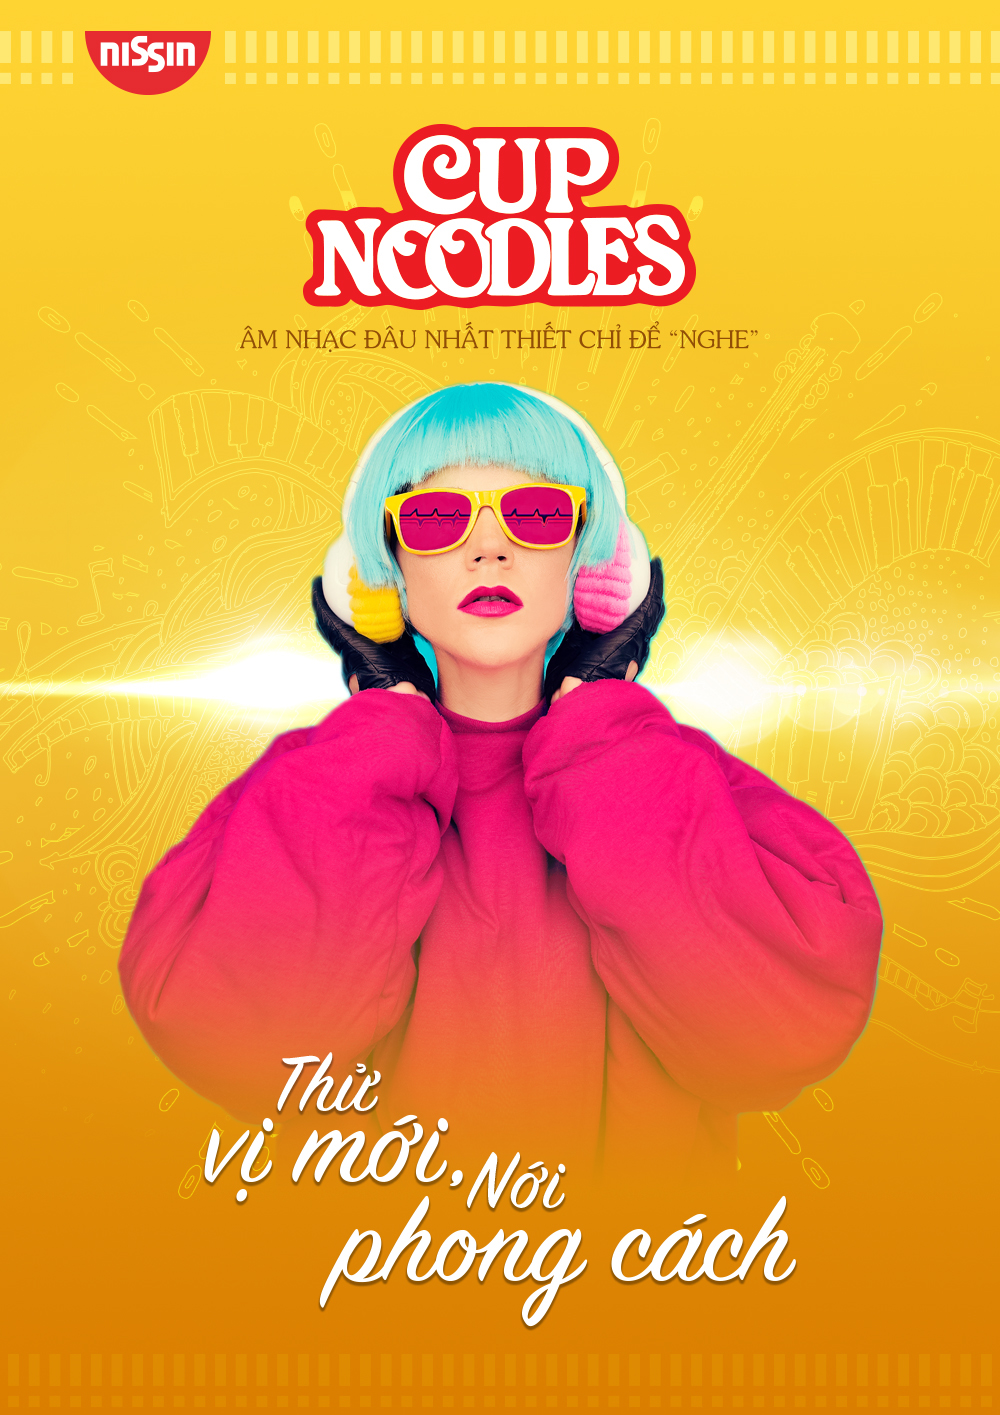 nissin noodle Cup Noodle fresh Young visual